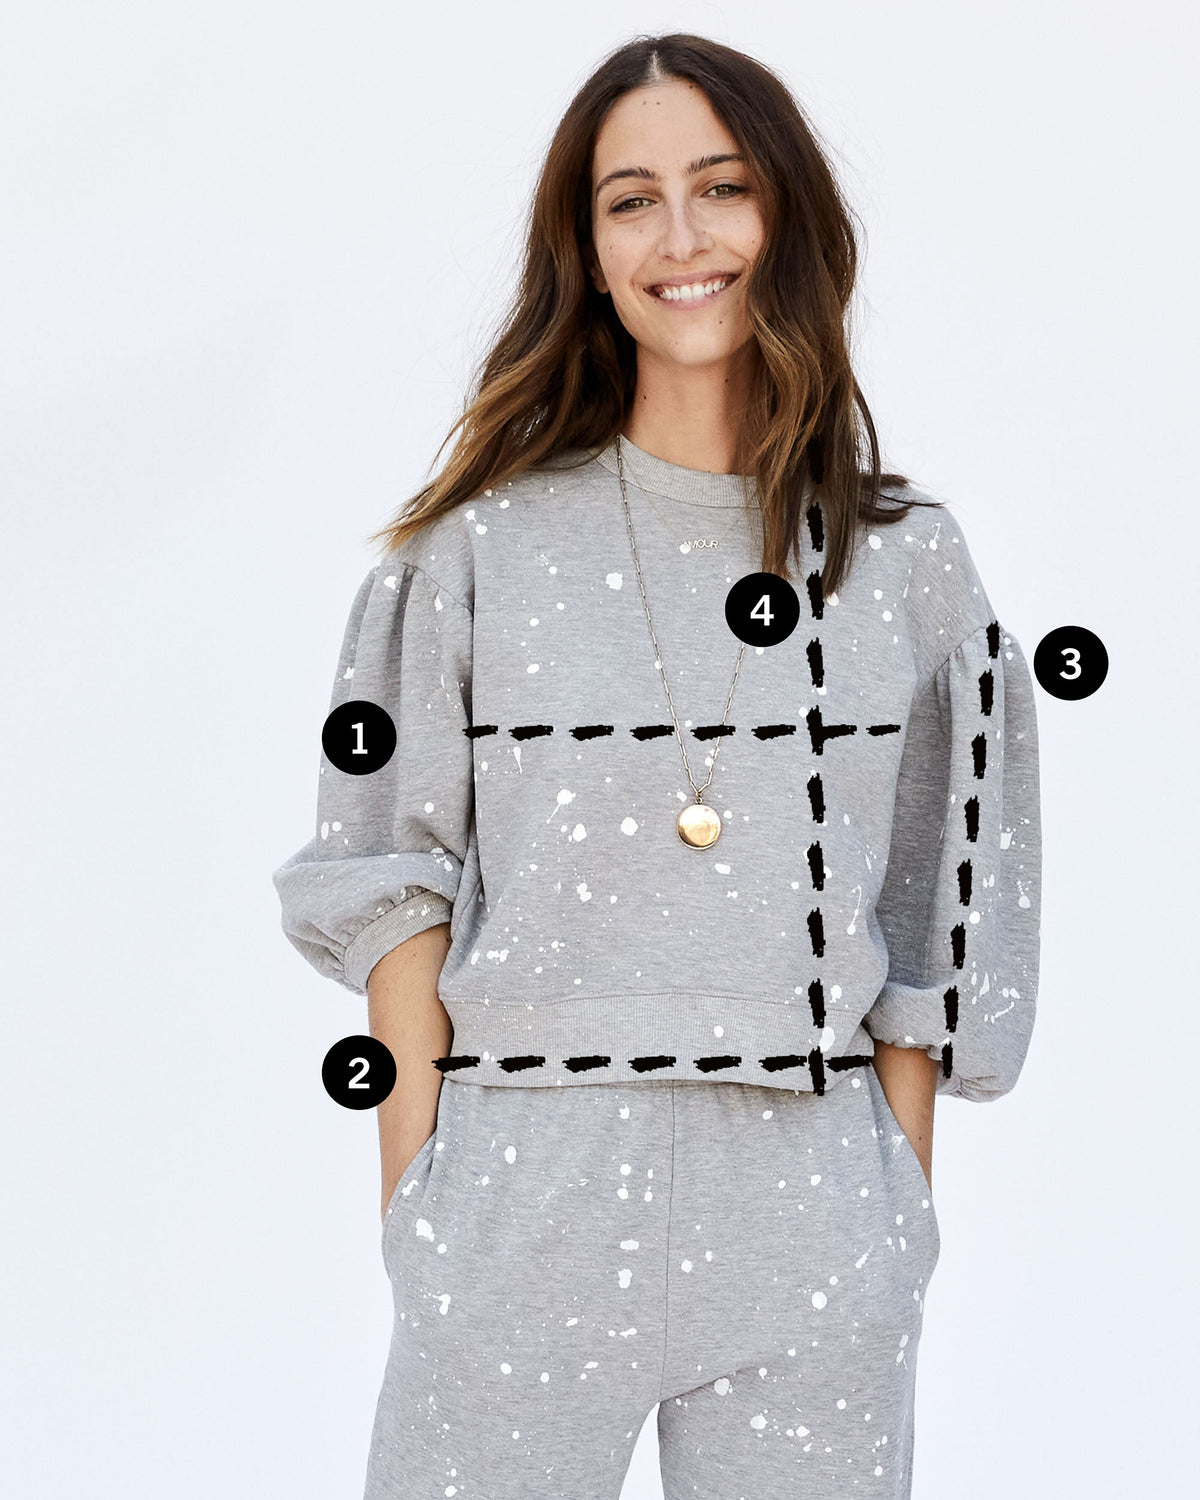 Drop shoulder sweatshirt on frannie with 4 lines to indicate the points of measurement 